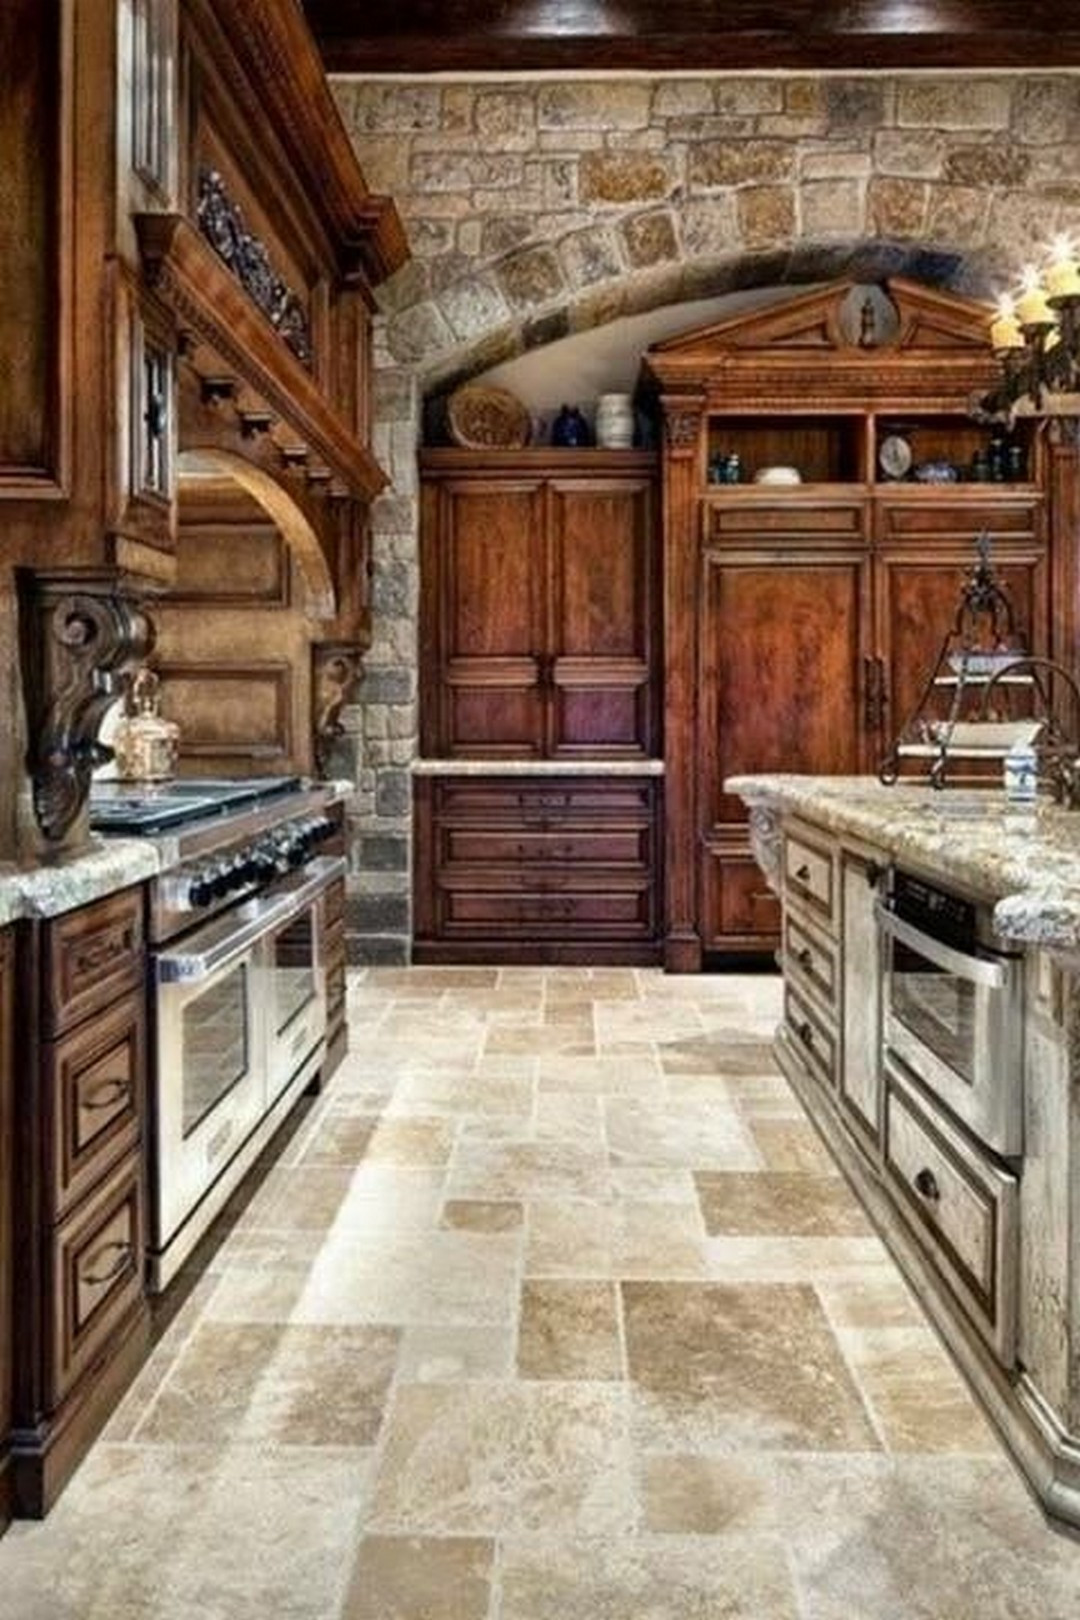 Rustic Country Kitchen Lovely Renew Your ordinary Kitchen with these Inspiring Rustic